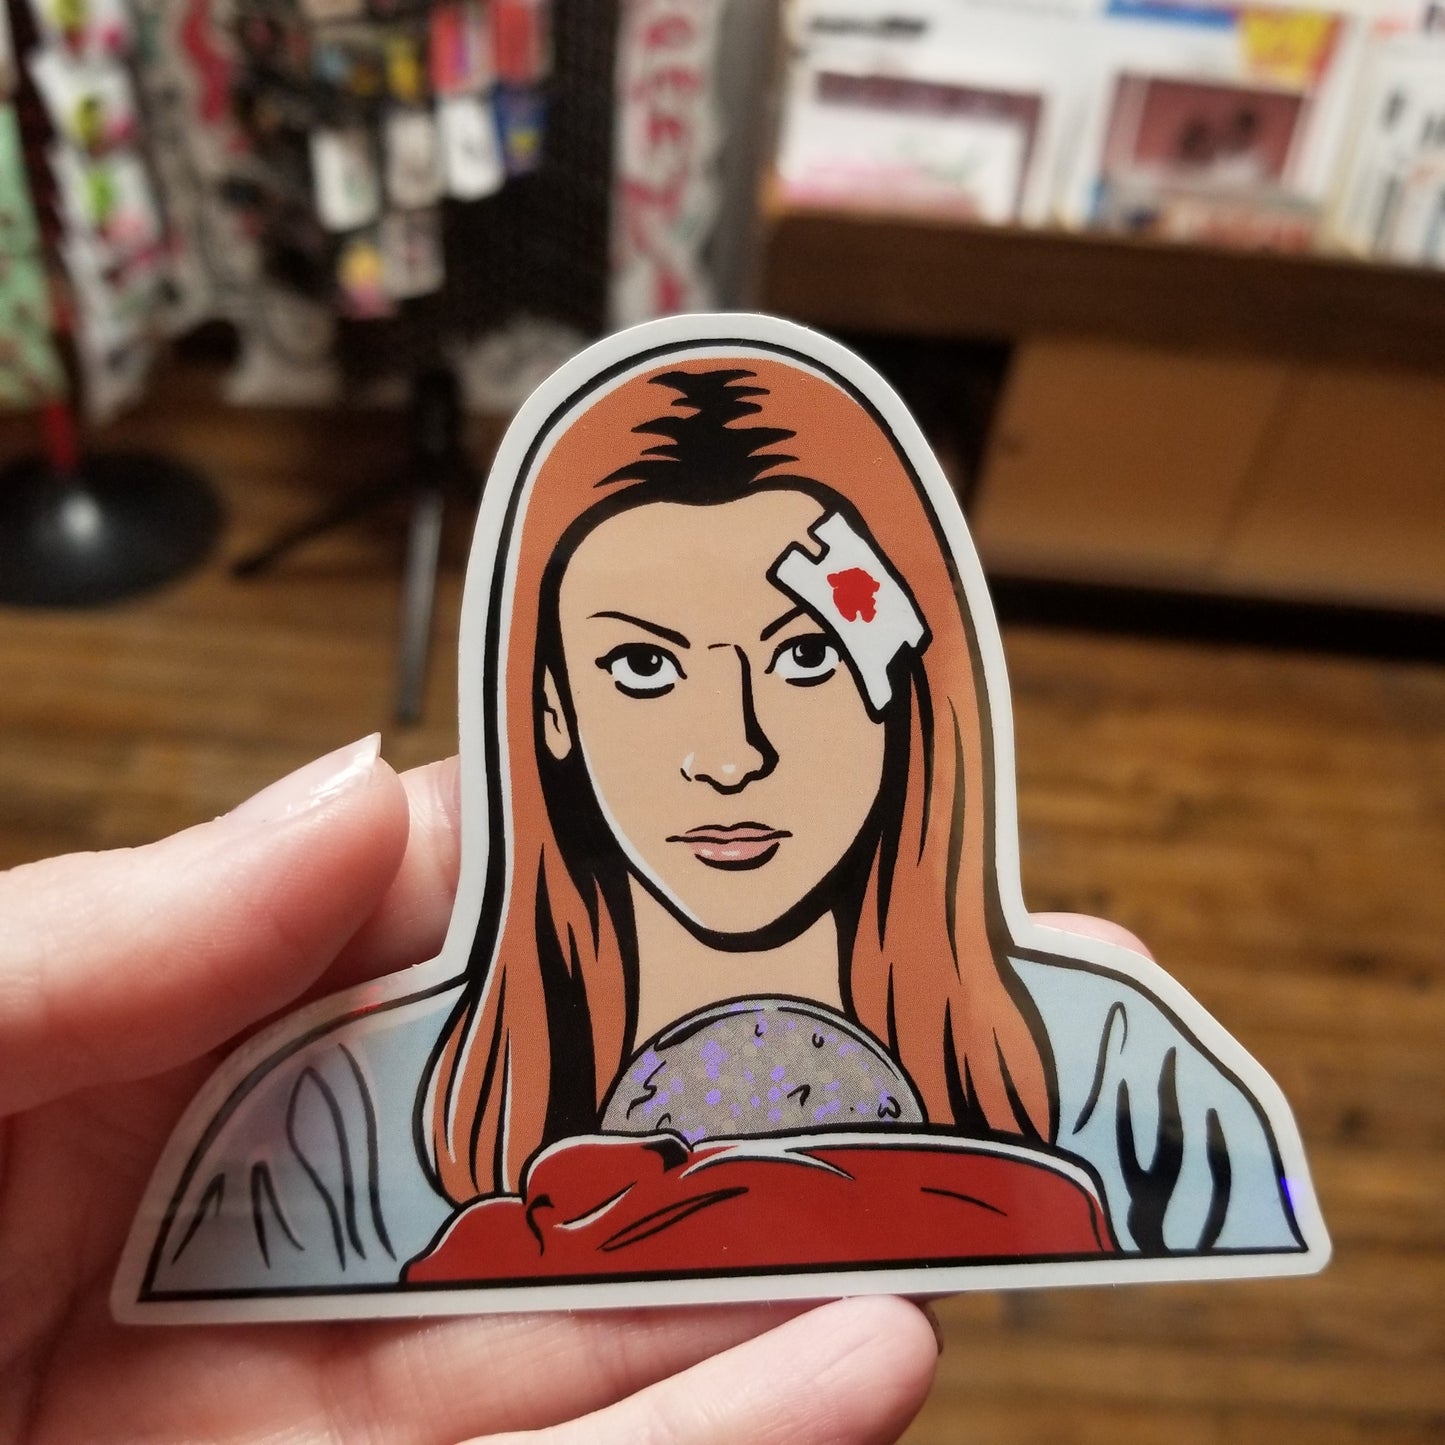 Willow "Becoming" STICKER By Slayerfest 98